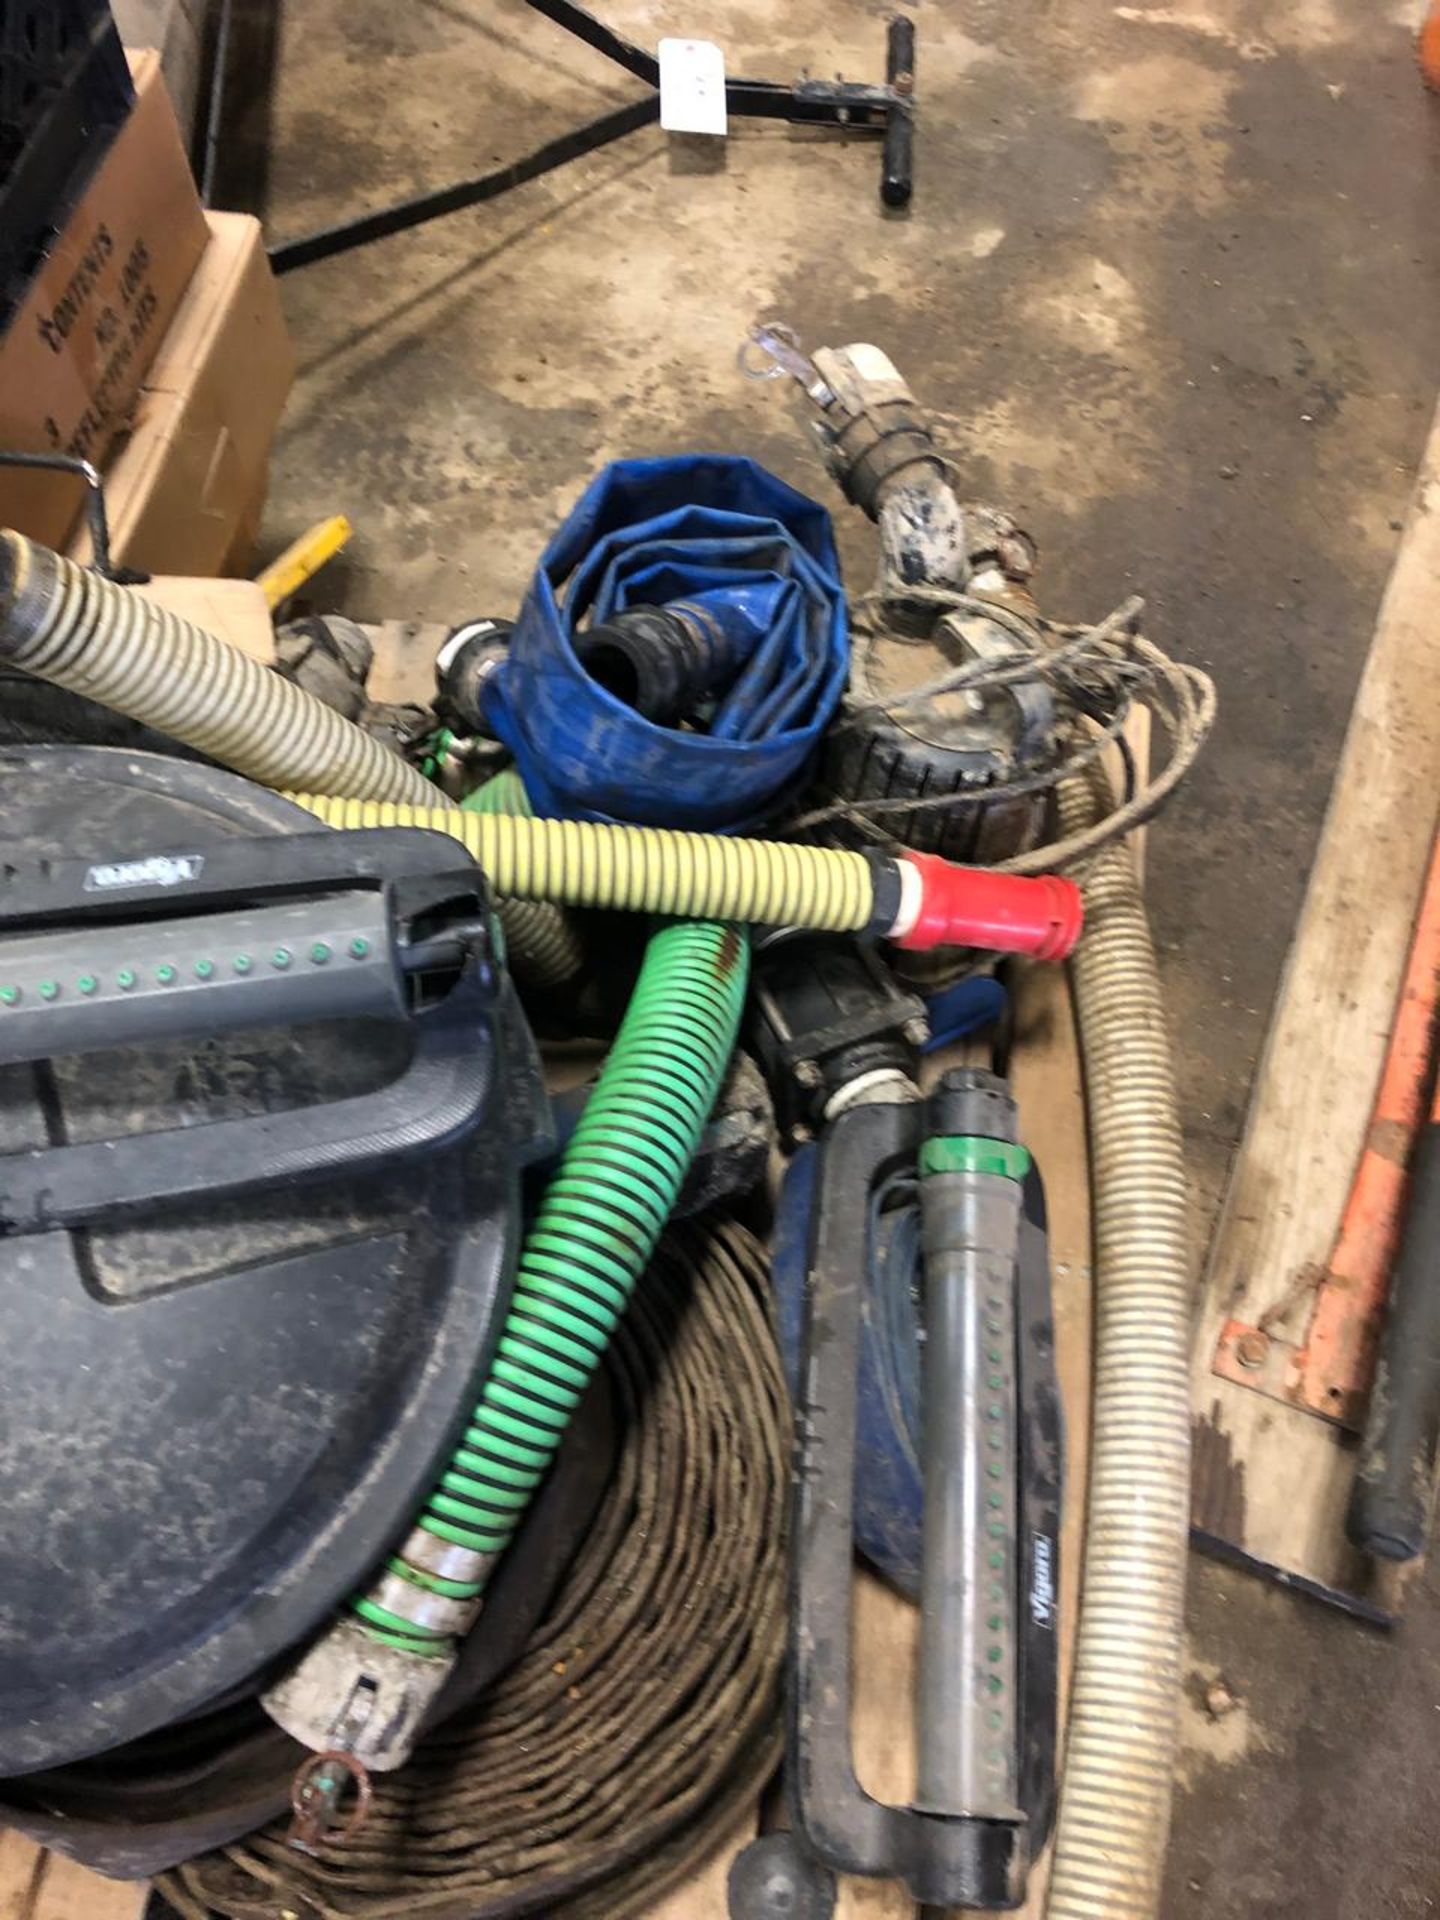 Skid of Hoses, Hose Attachments and Pump - Image 2 of 3